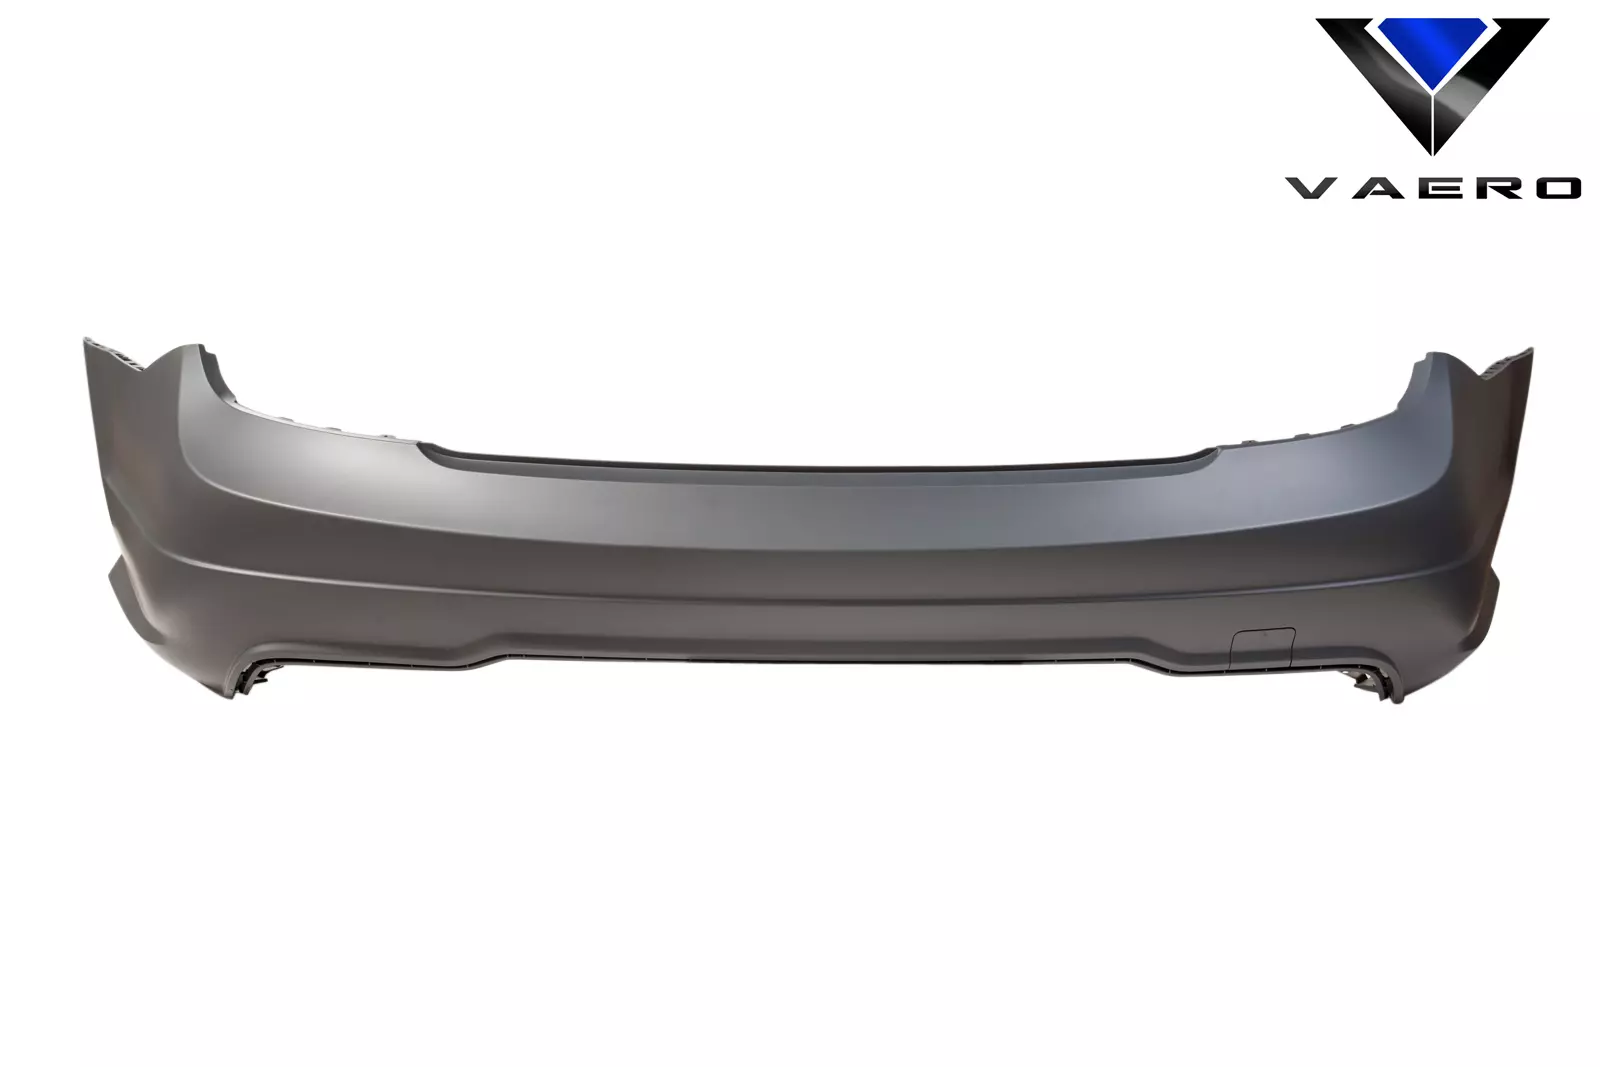 2008-2014 Mercedes C Class W204 C250 Vaero C63 V2 Look Rear Bumper Cover ( without PDC ) 2 Piece - Image 3